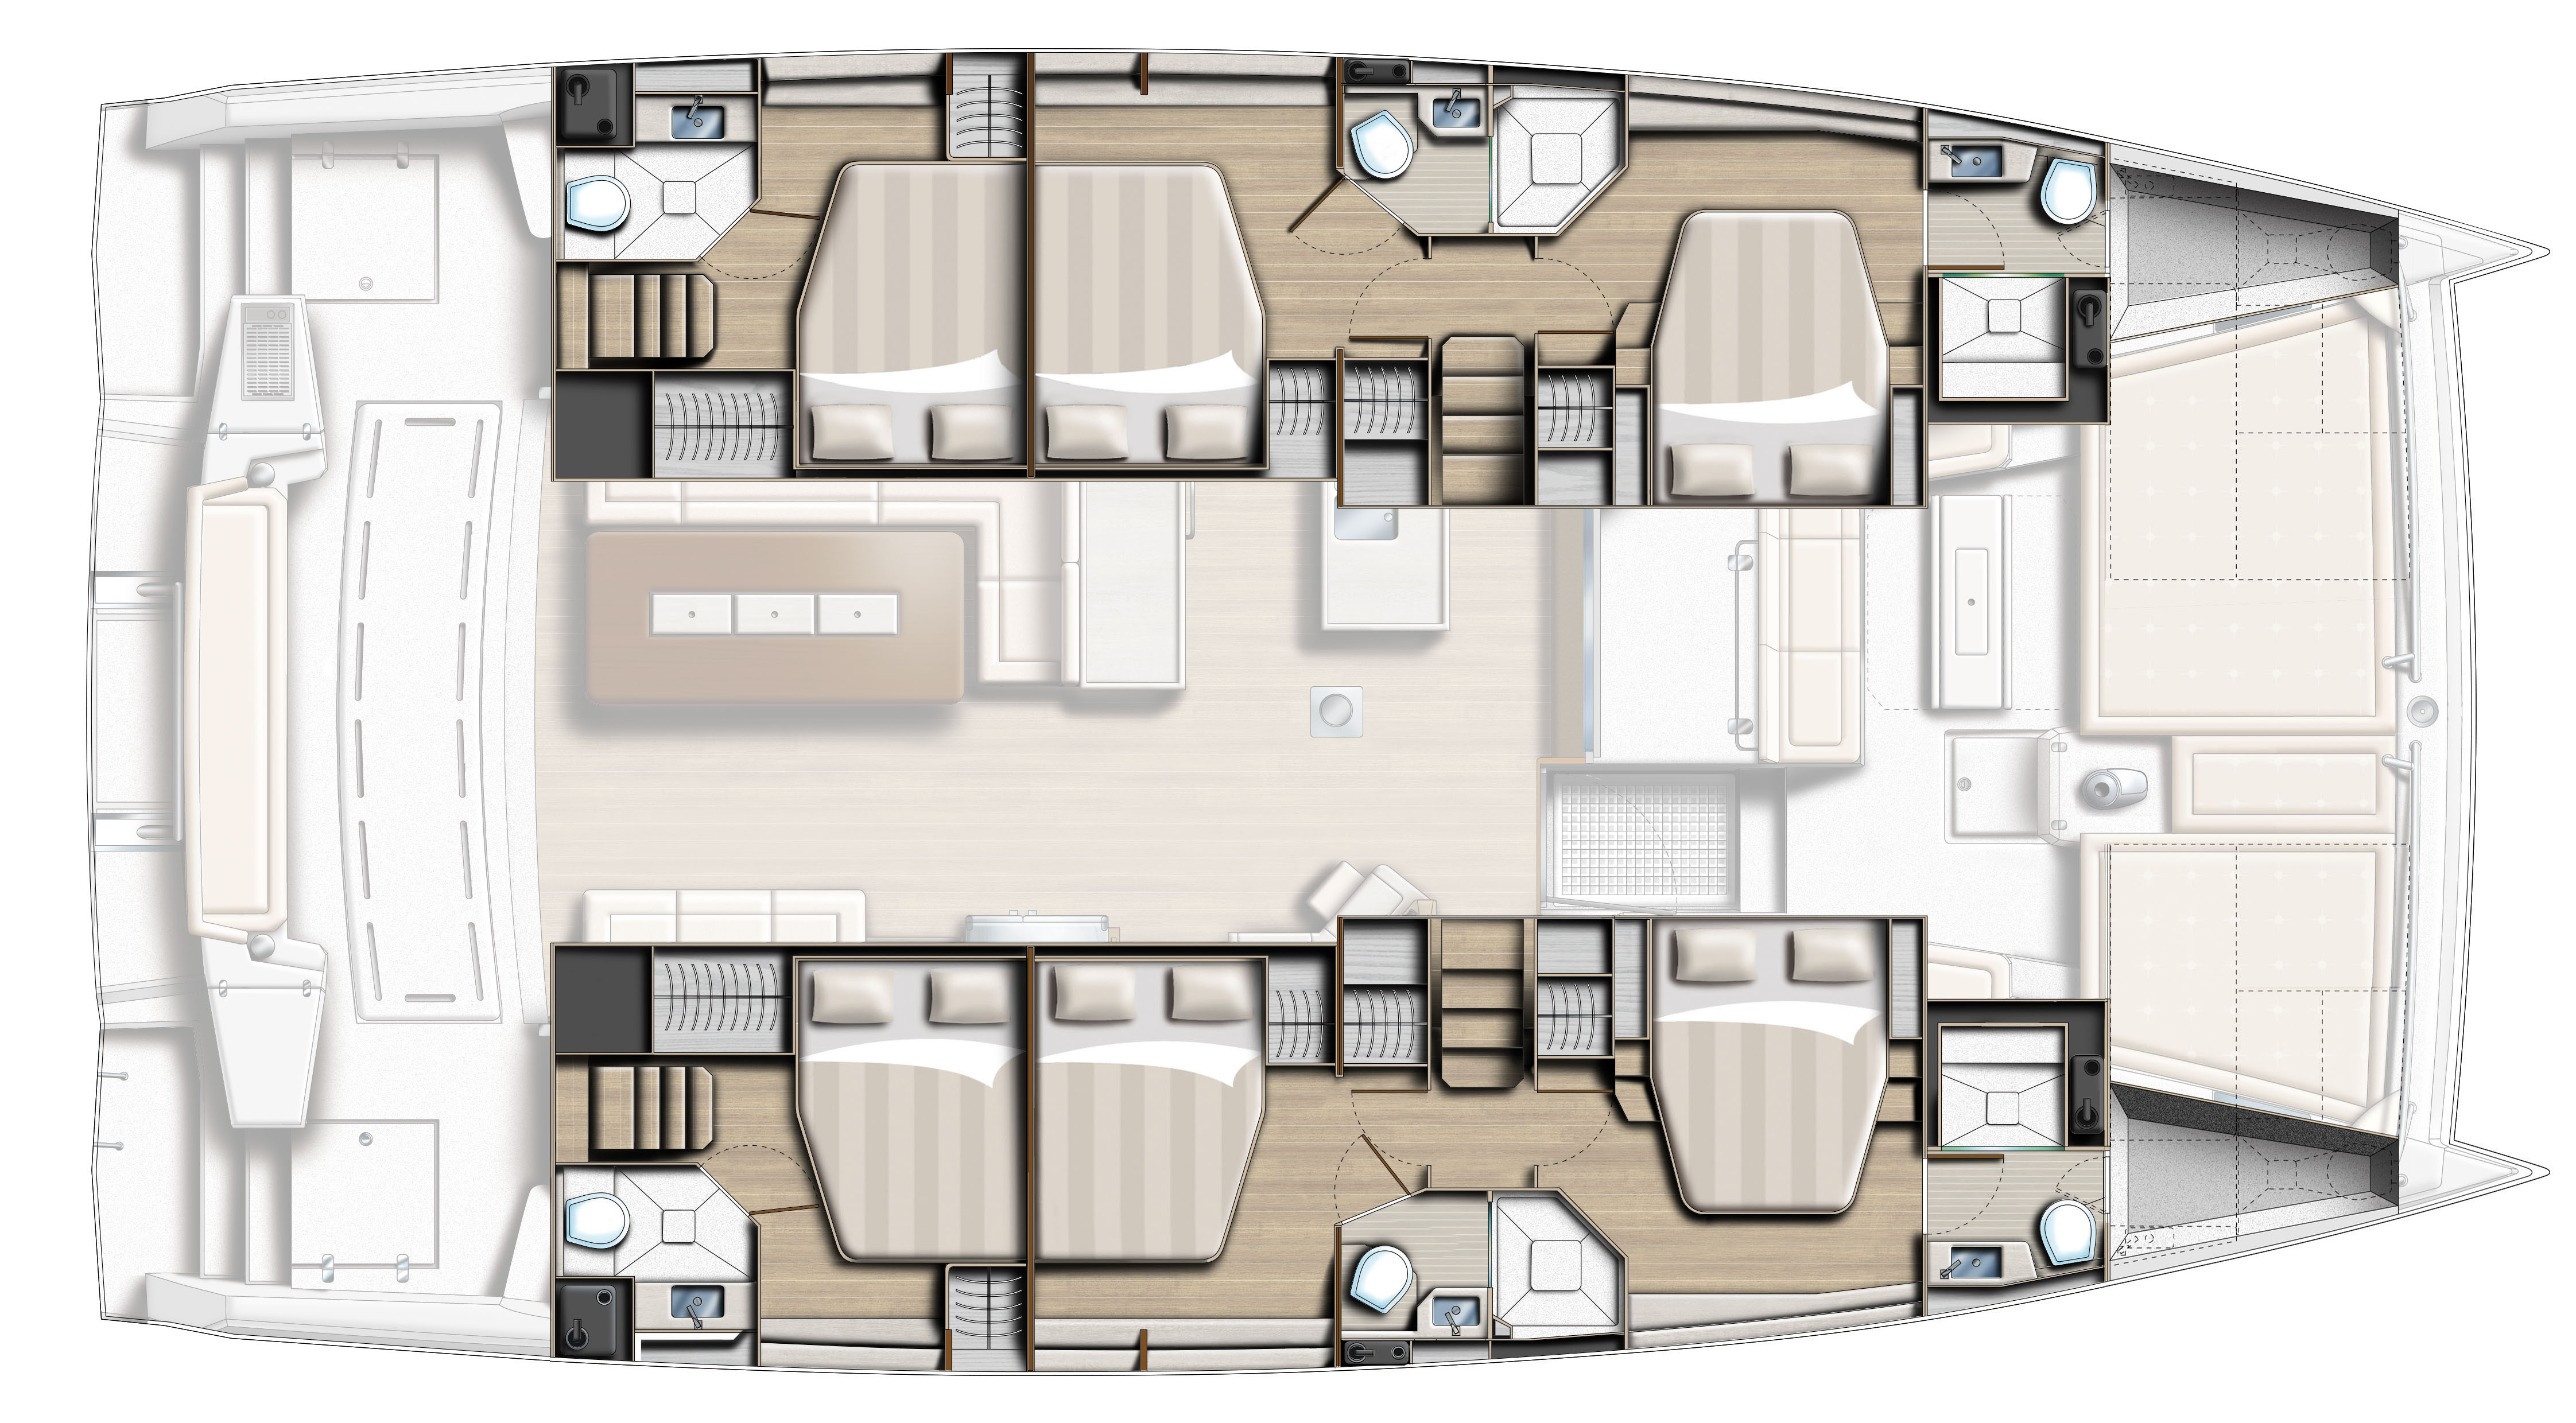 Catamaran Bali 5 4 Pictures Plans And Features